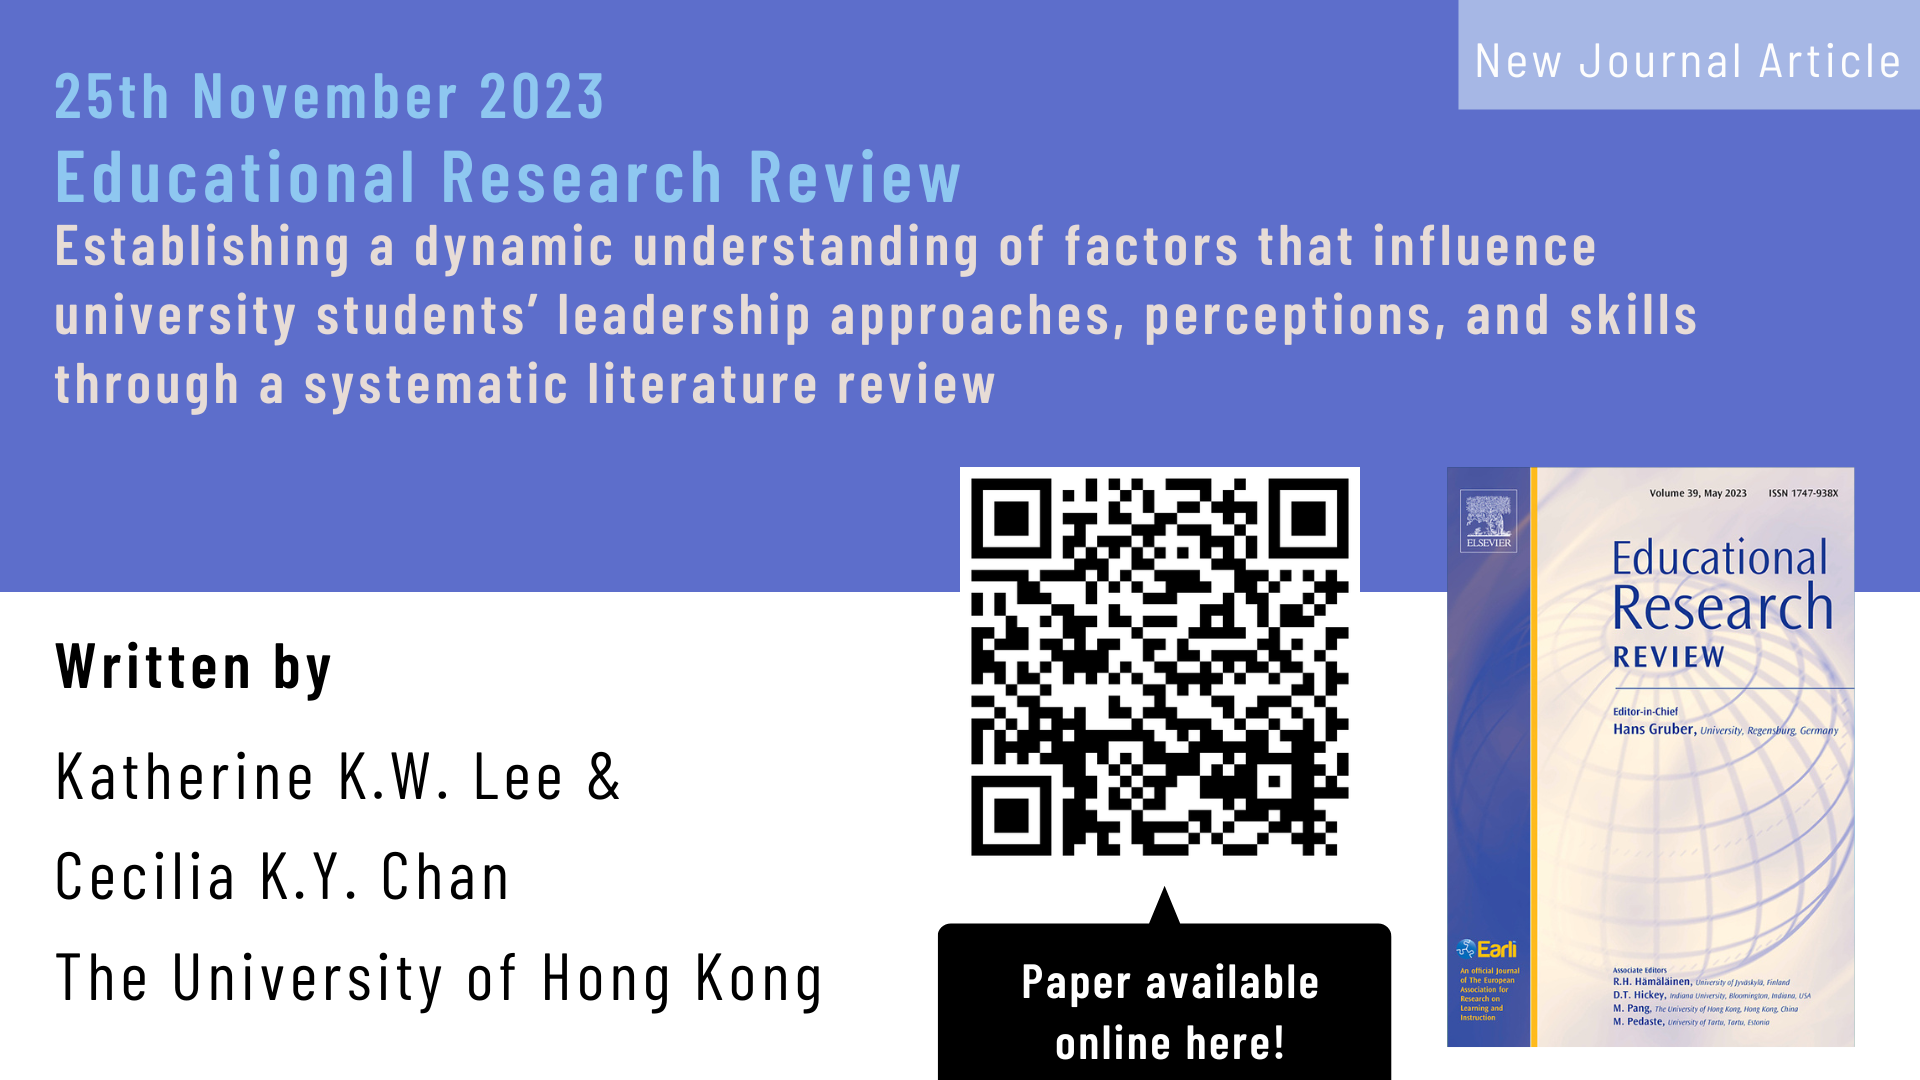 19th October 2023 – New paper published in Educational Research Review